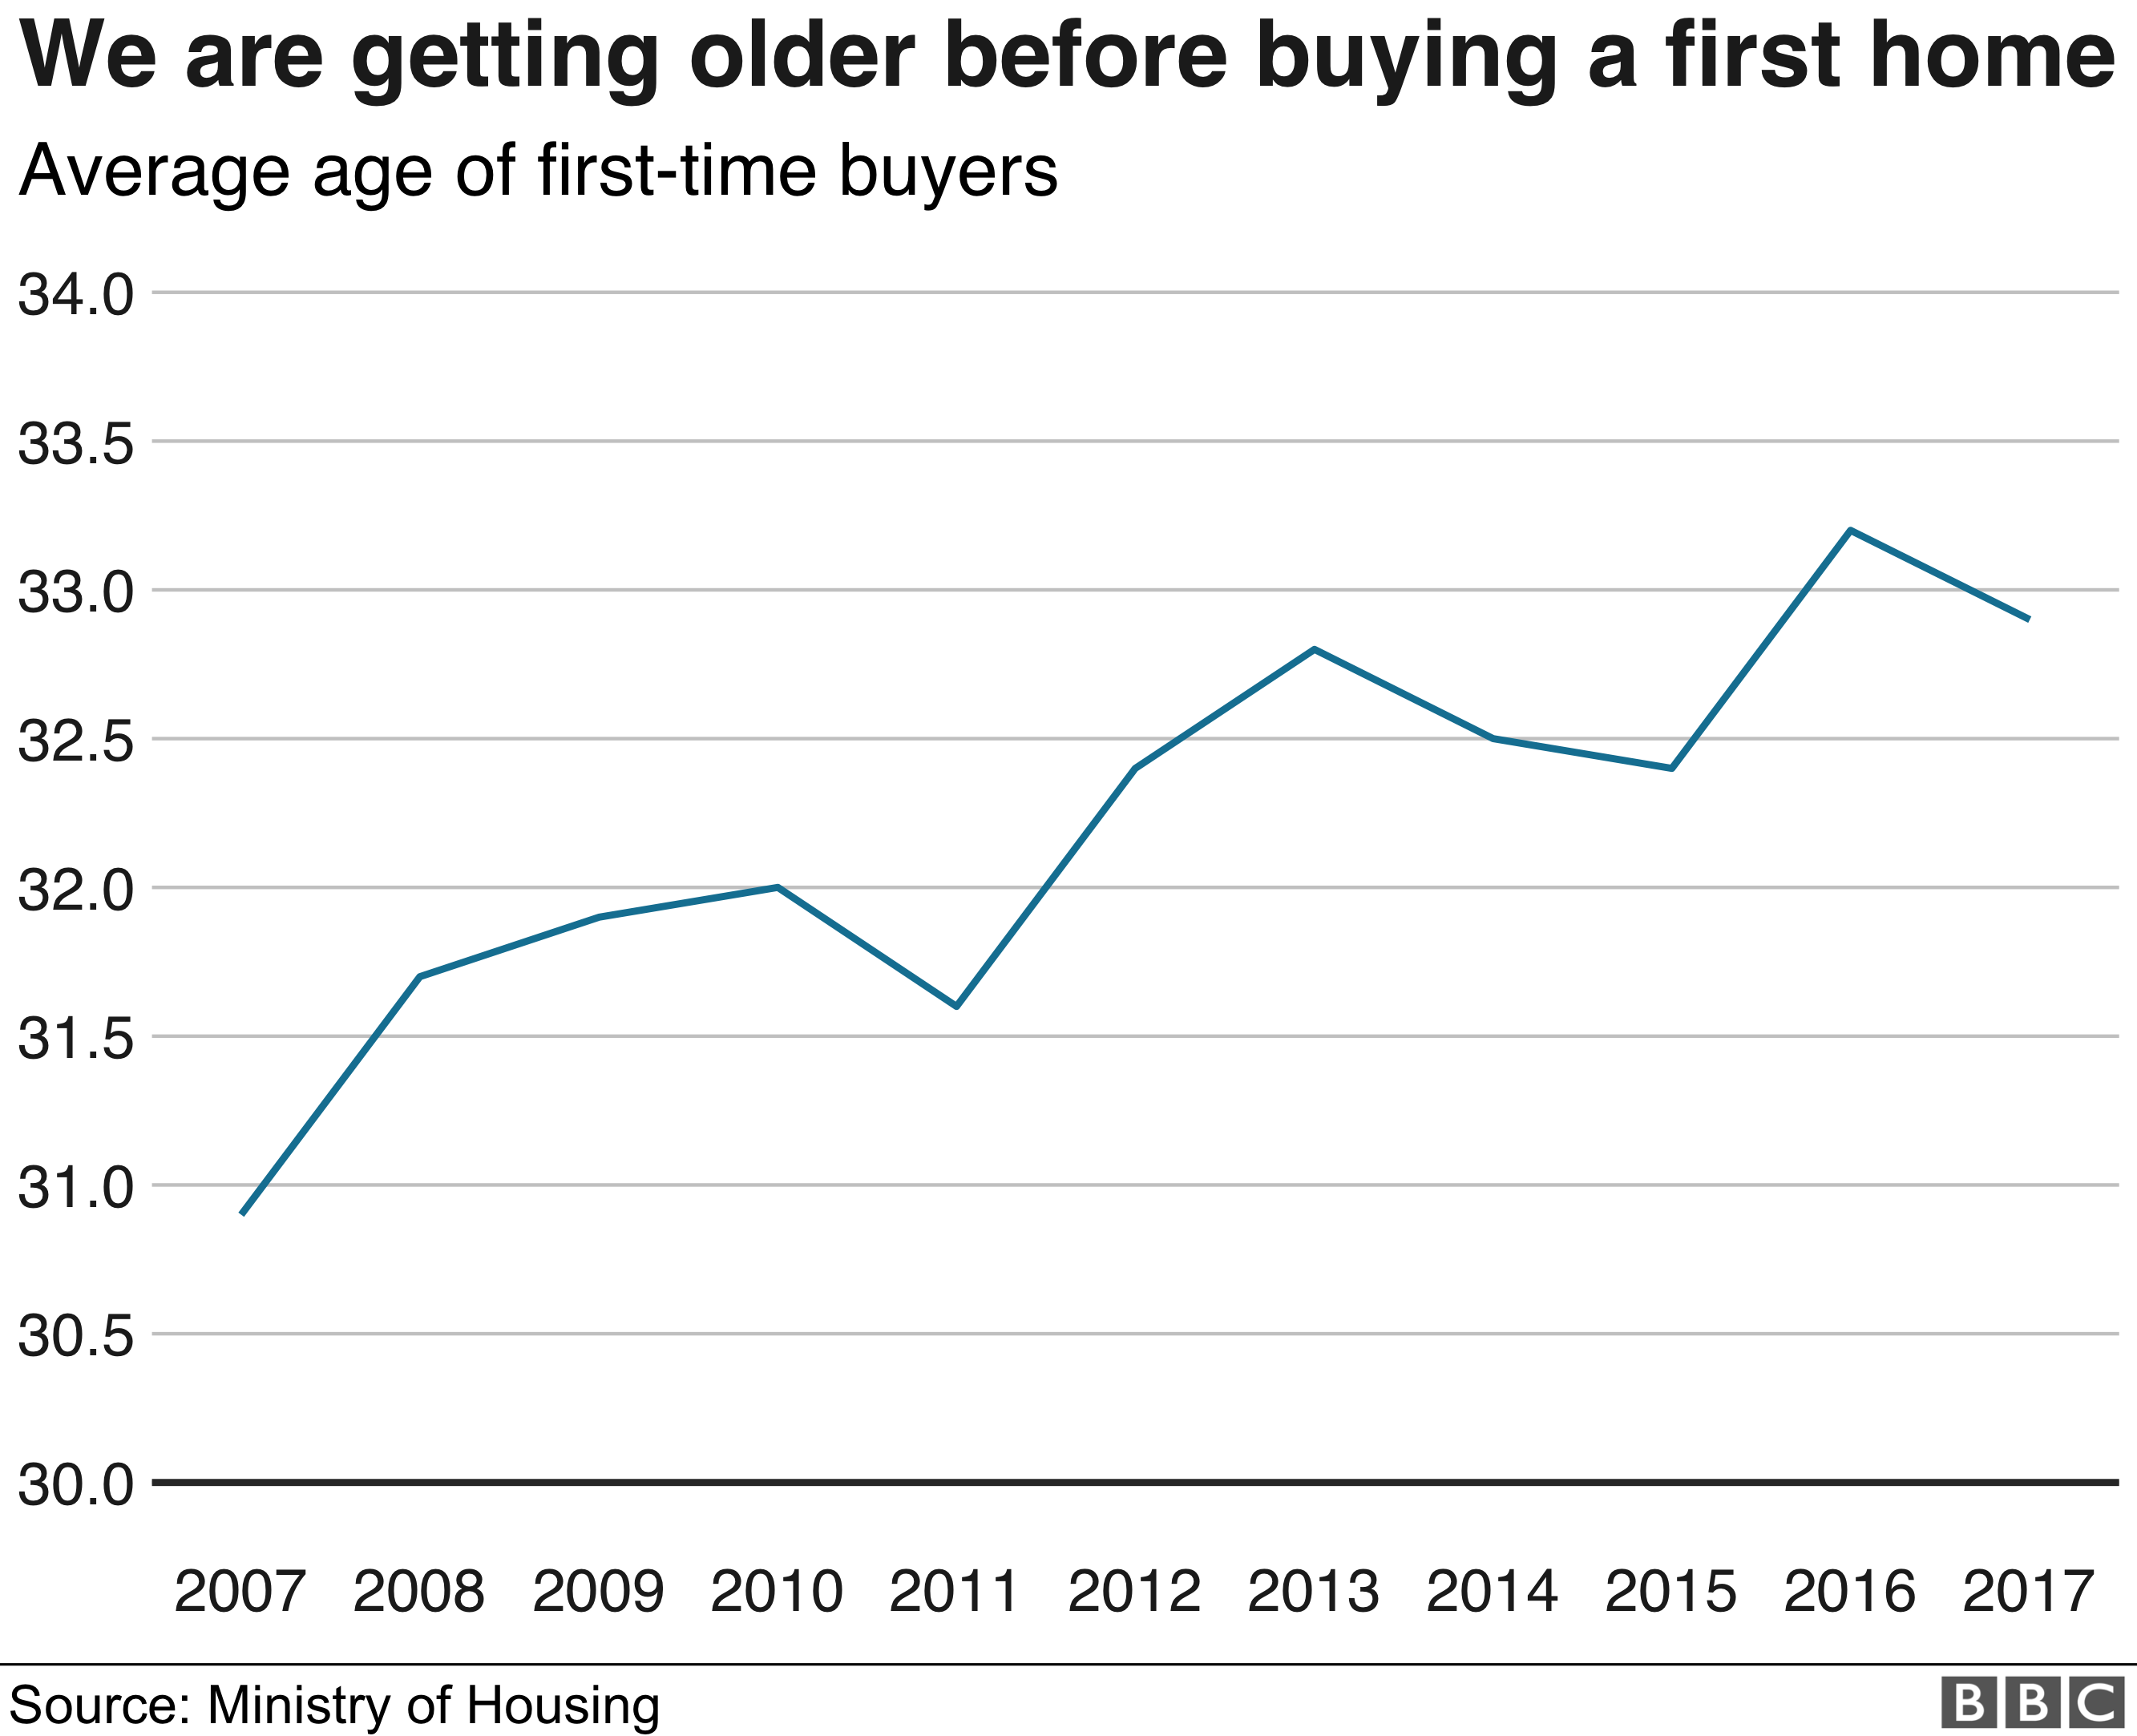 Average age of first-time buyer